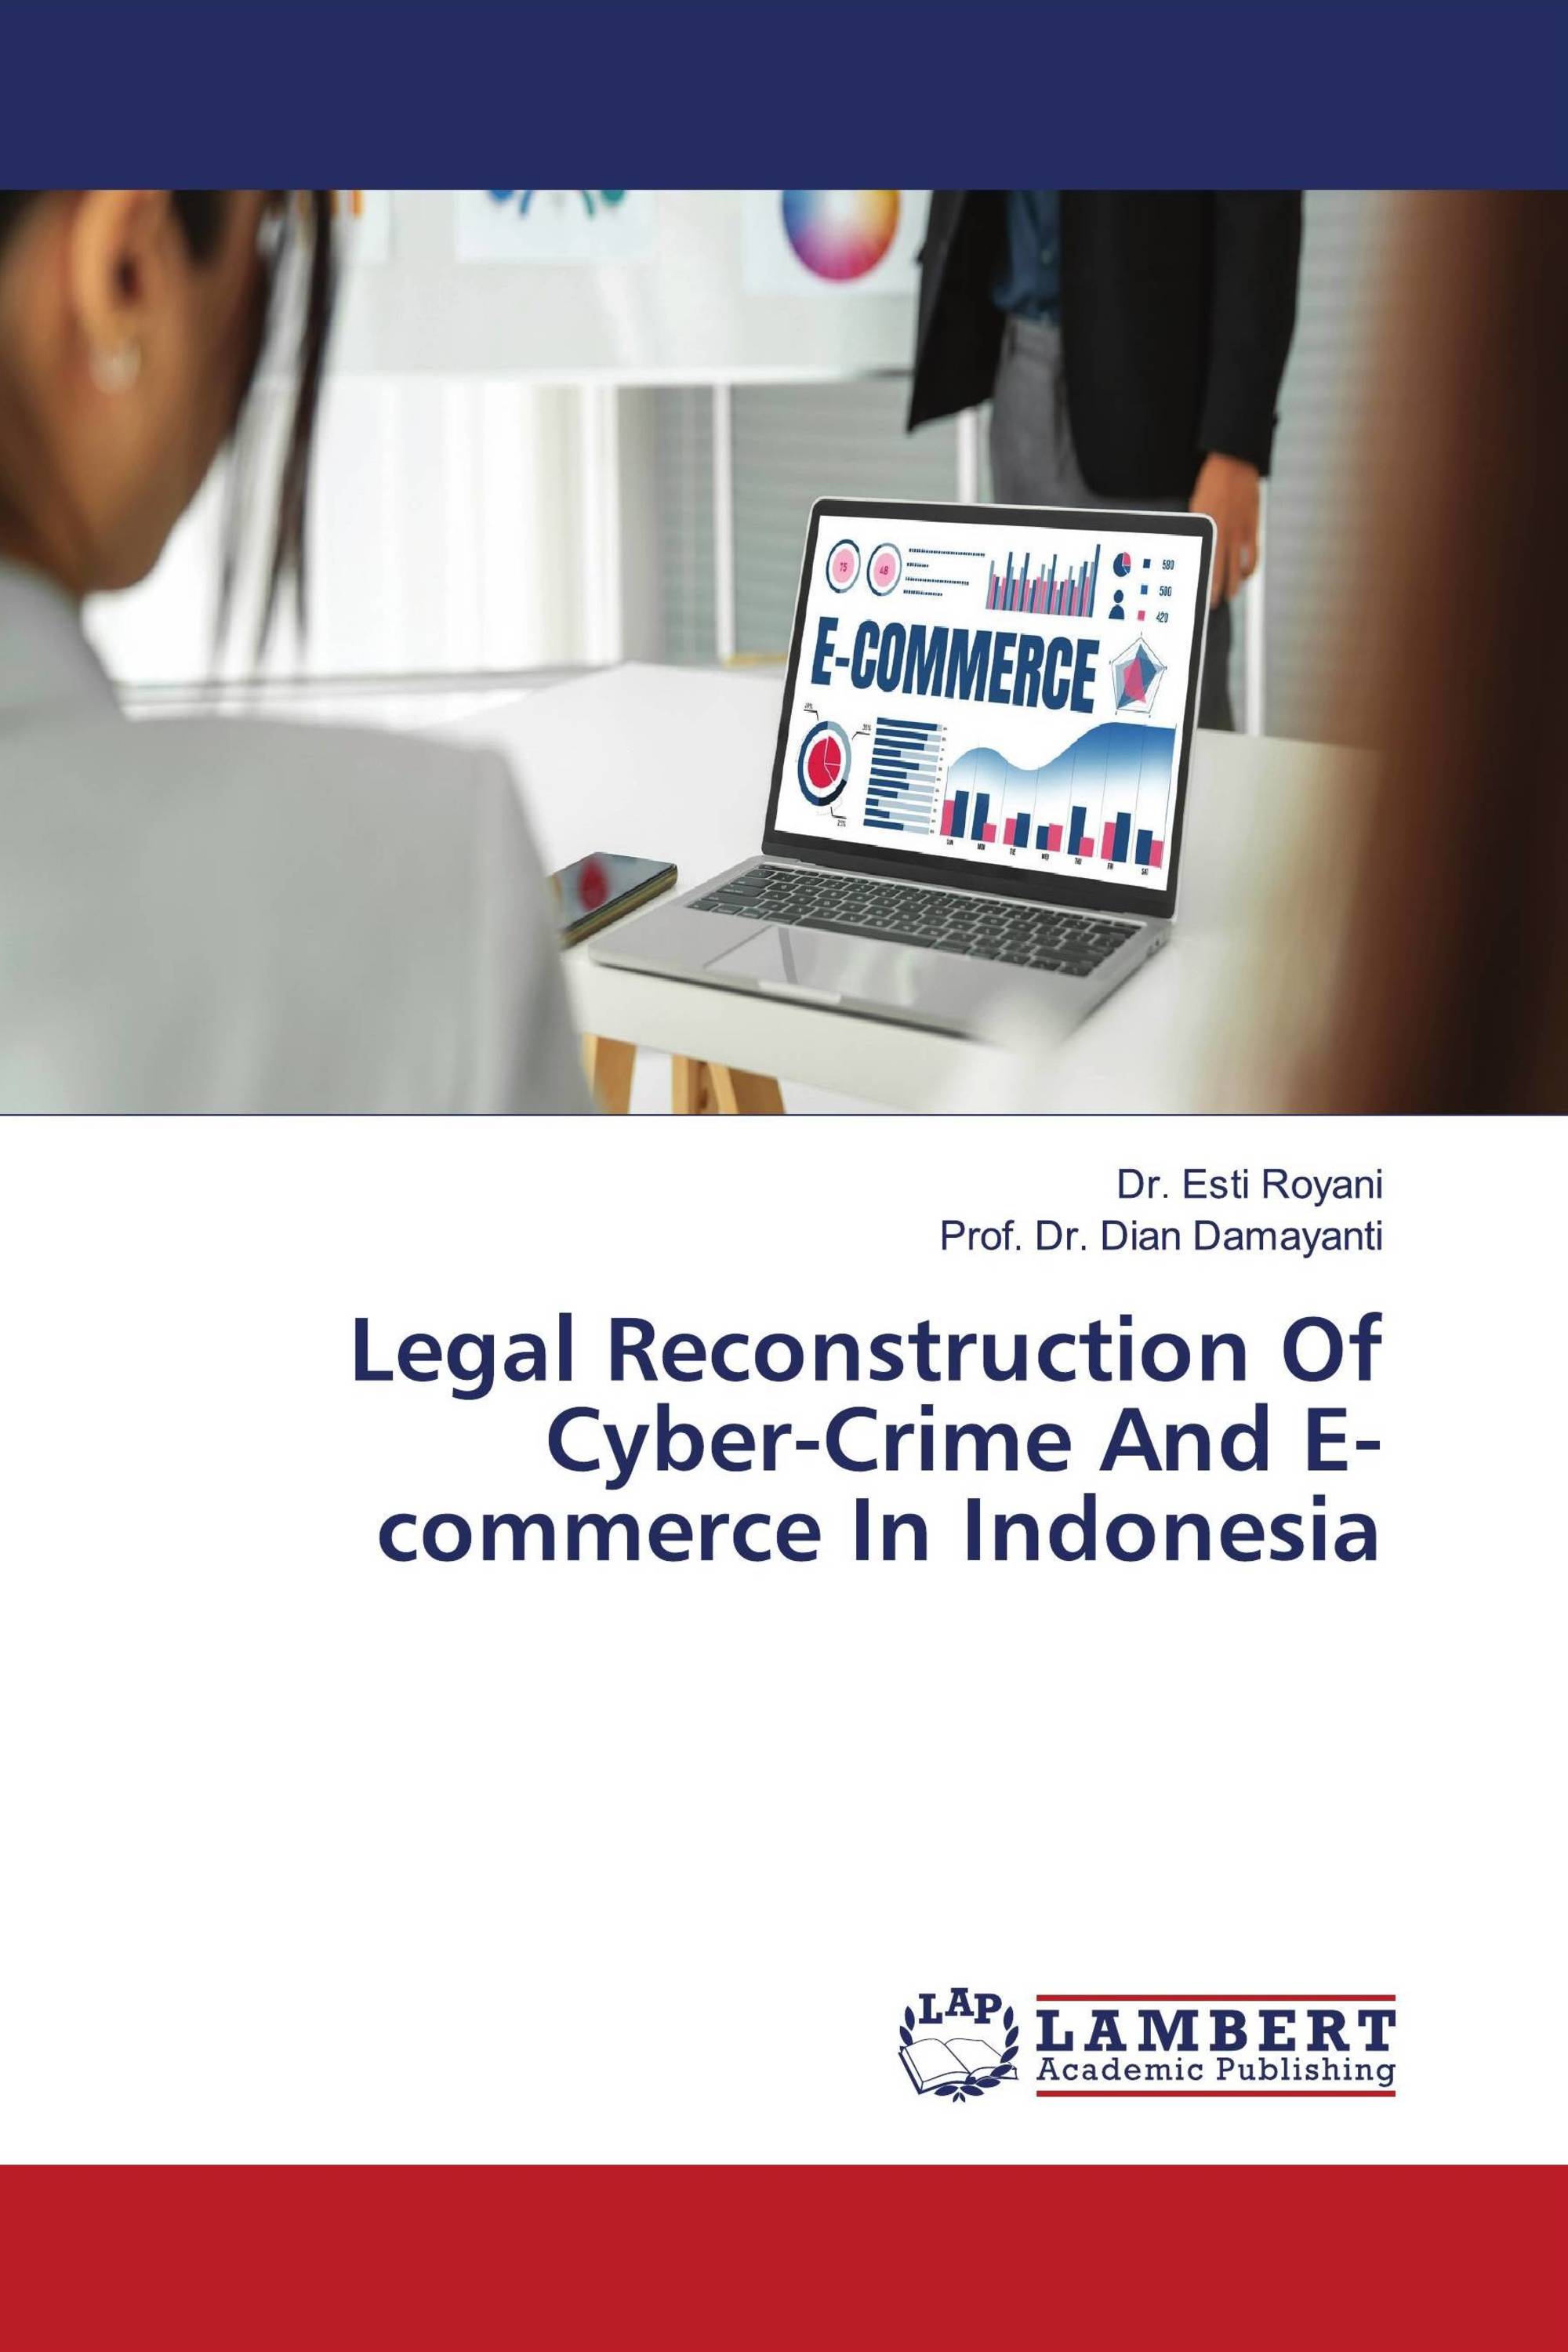 Legal Reconstruction Of Cyber-Crime And E-commerce In Indonesia